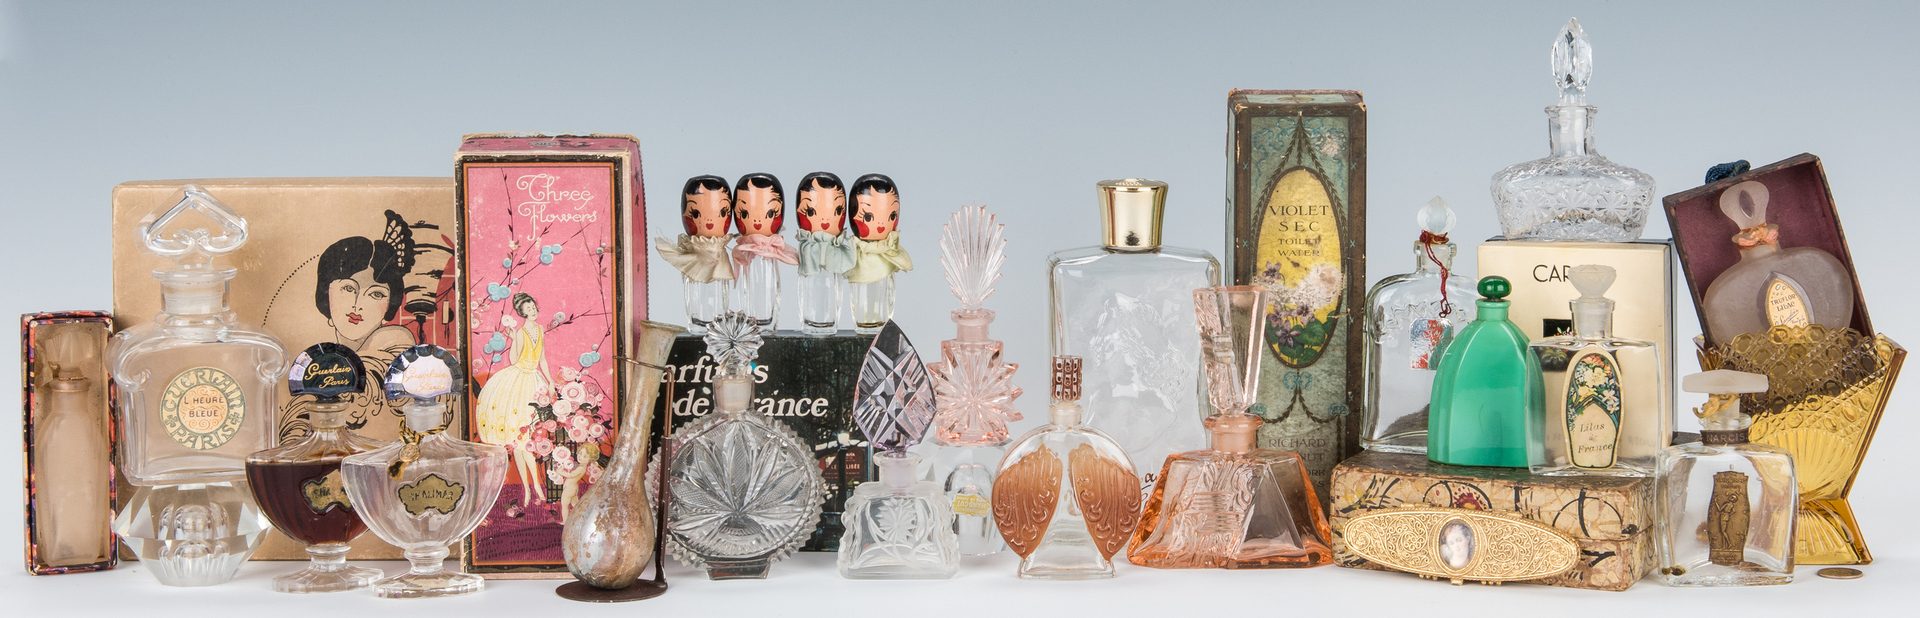 Lot 435: 28 Perfume Package Sets and Bottles